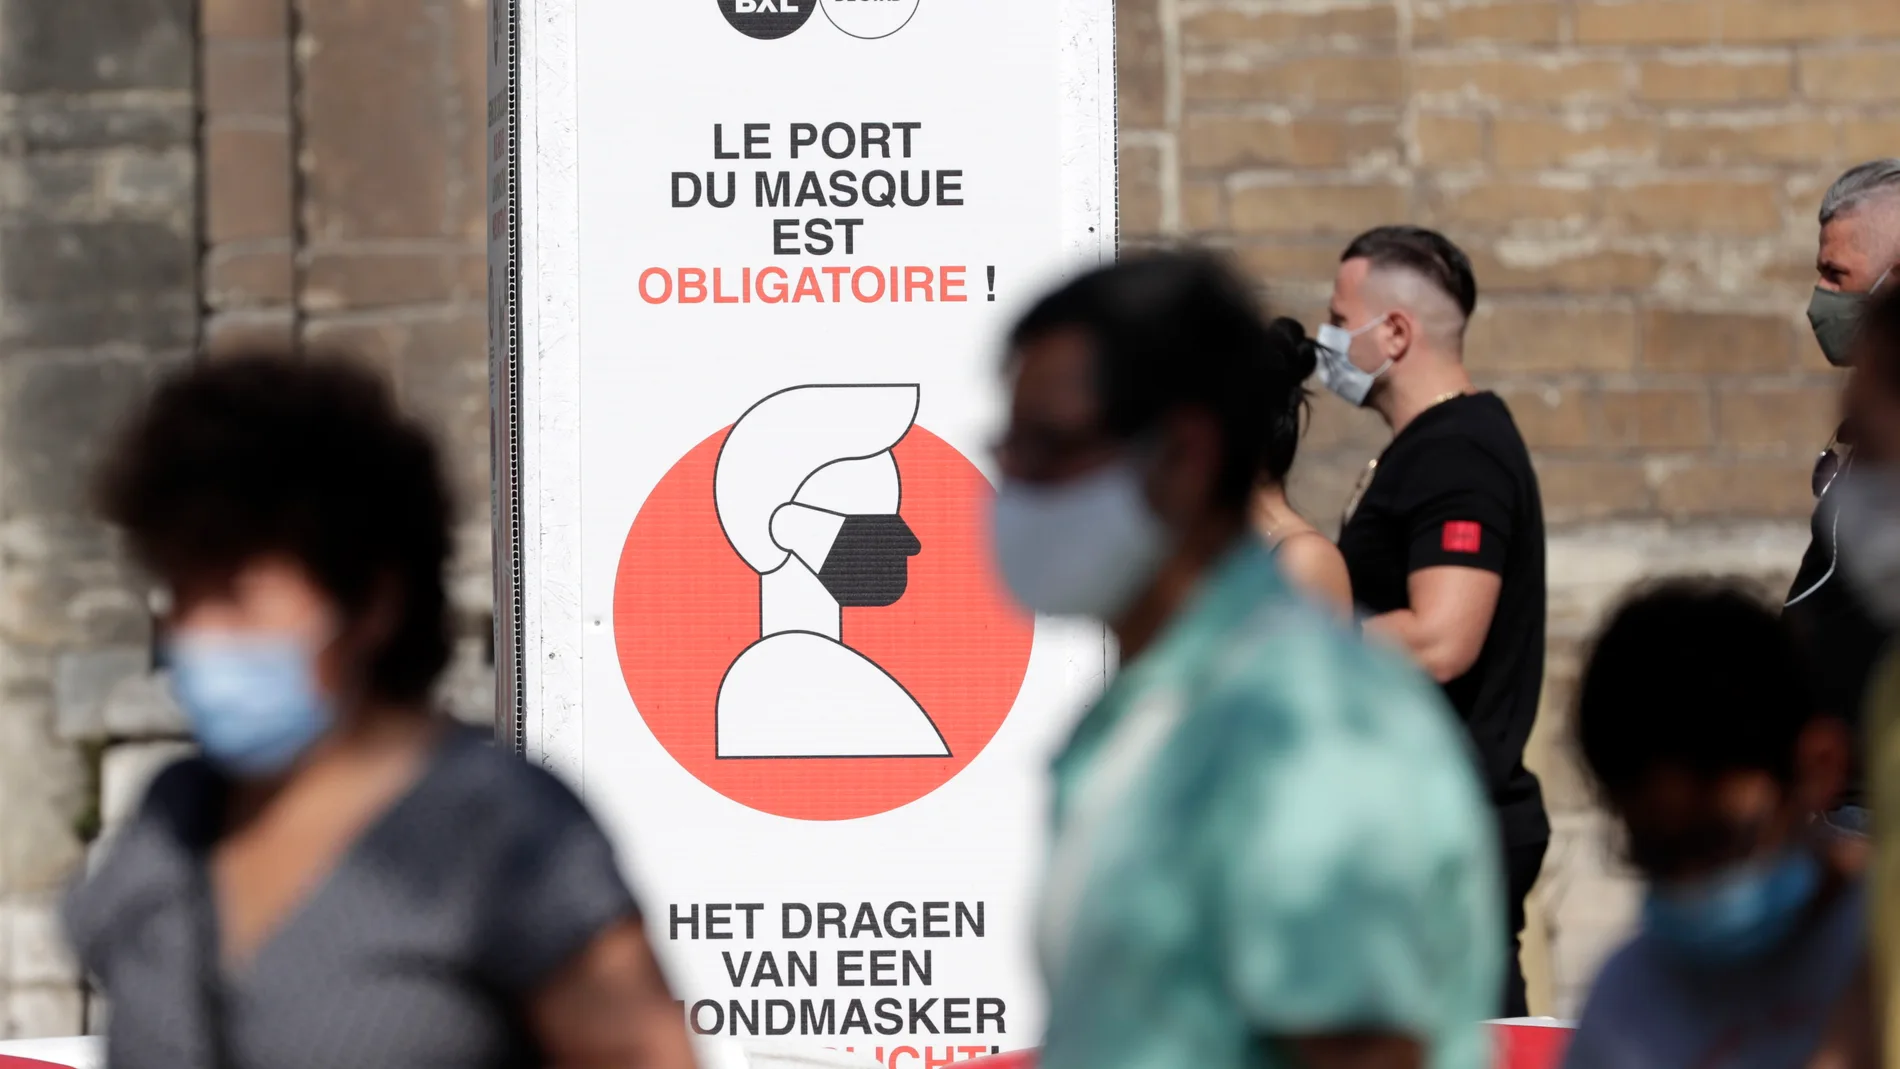 Facemasks become mandatory in Brussels region, regional authorities announced amid surge in coronavirus infections